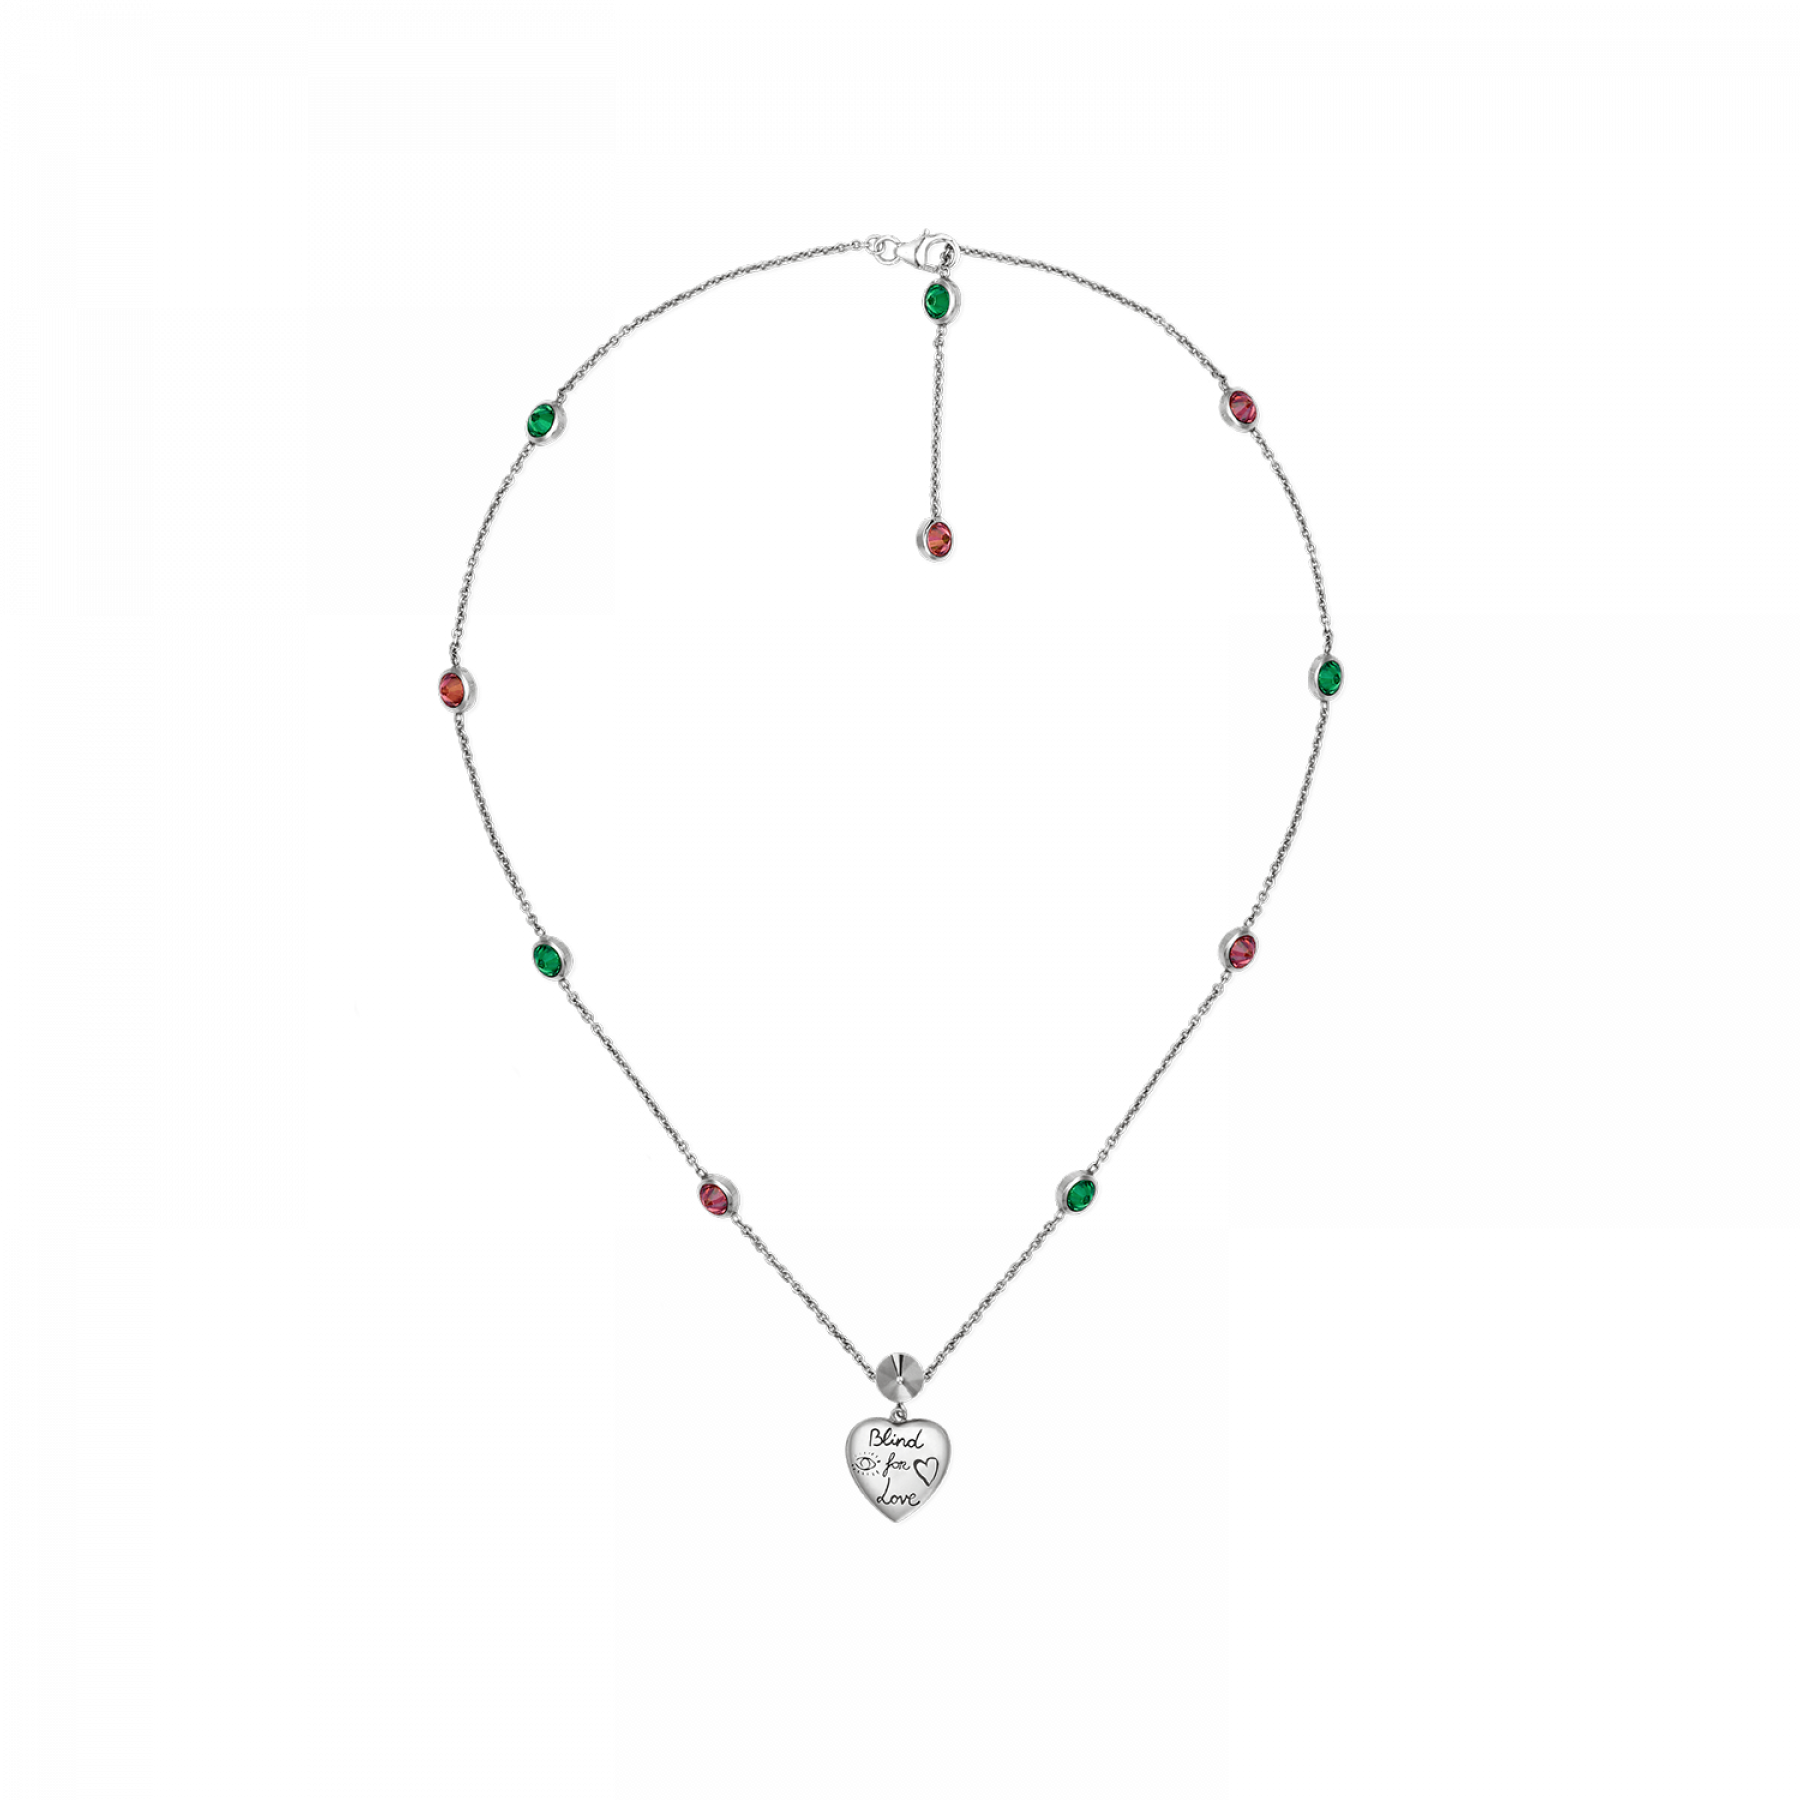 Blind For Love Heart Necklace With Green & Pink Cz (sterling Silver)